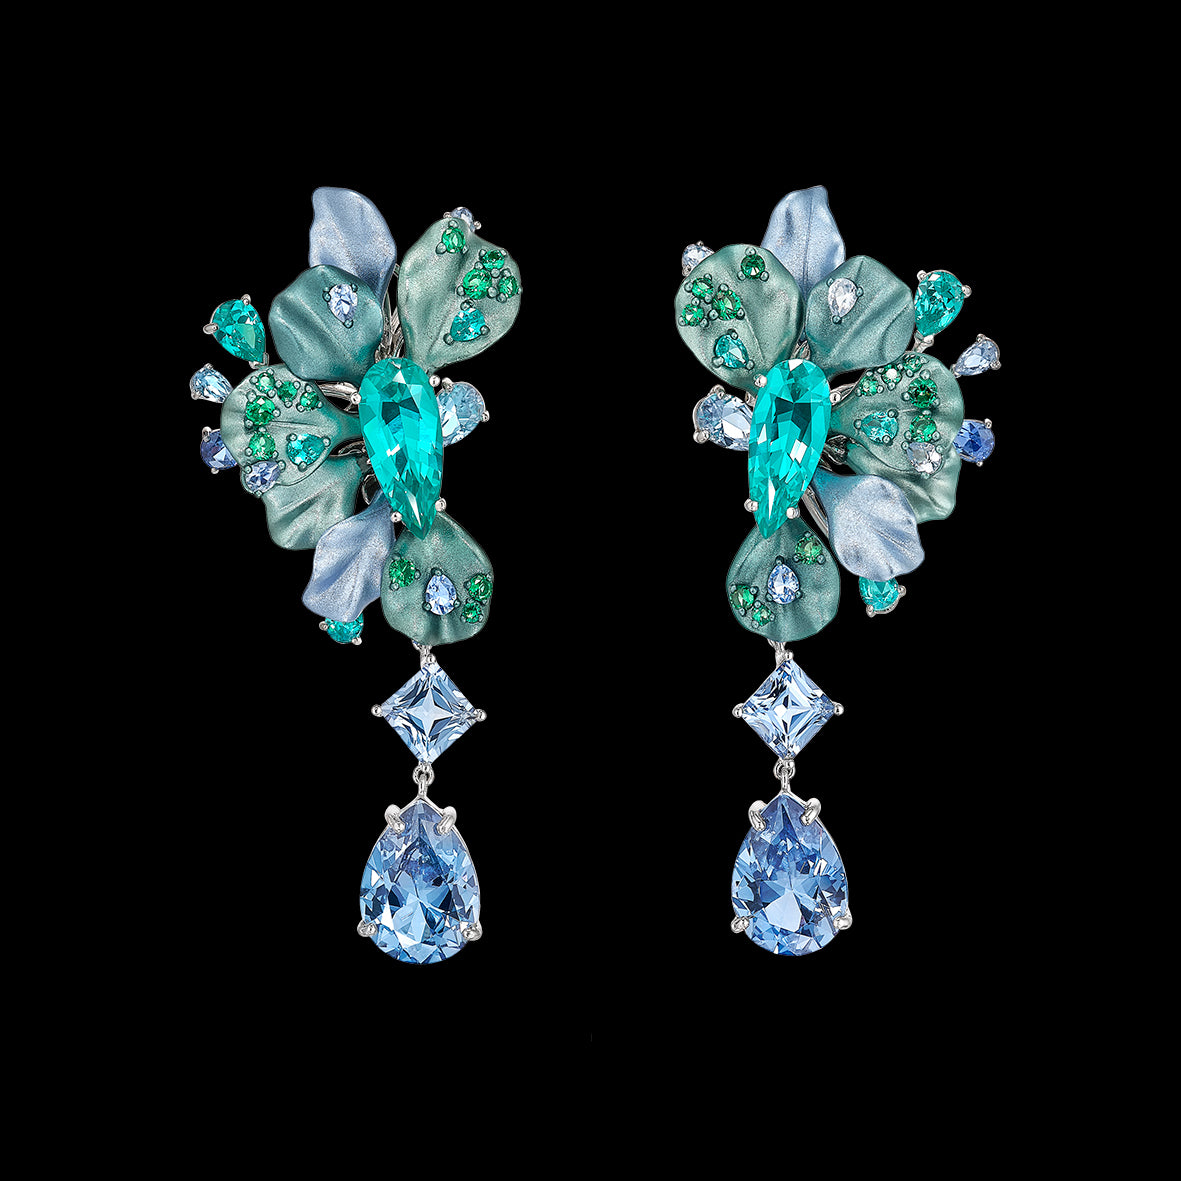 Paraiba Ariel Earrings, Earring, Anabela Chan Joaillerie - Fine jewelry with laboratory grown and created gemstones hand-crafted in the United Kingdom. Anabela Chan Joaillerie is the first fine jewellery brand in the world to champion laboratory-grown and created gemstones with high jewellery design, artisanal craftsmanship and a focus on ethical and sustainable innovations.